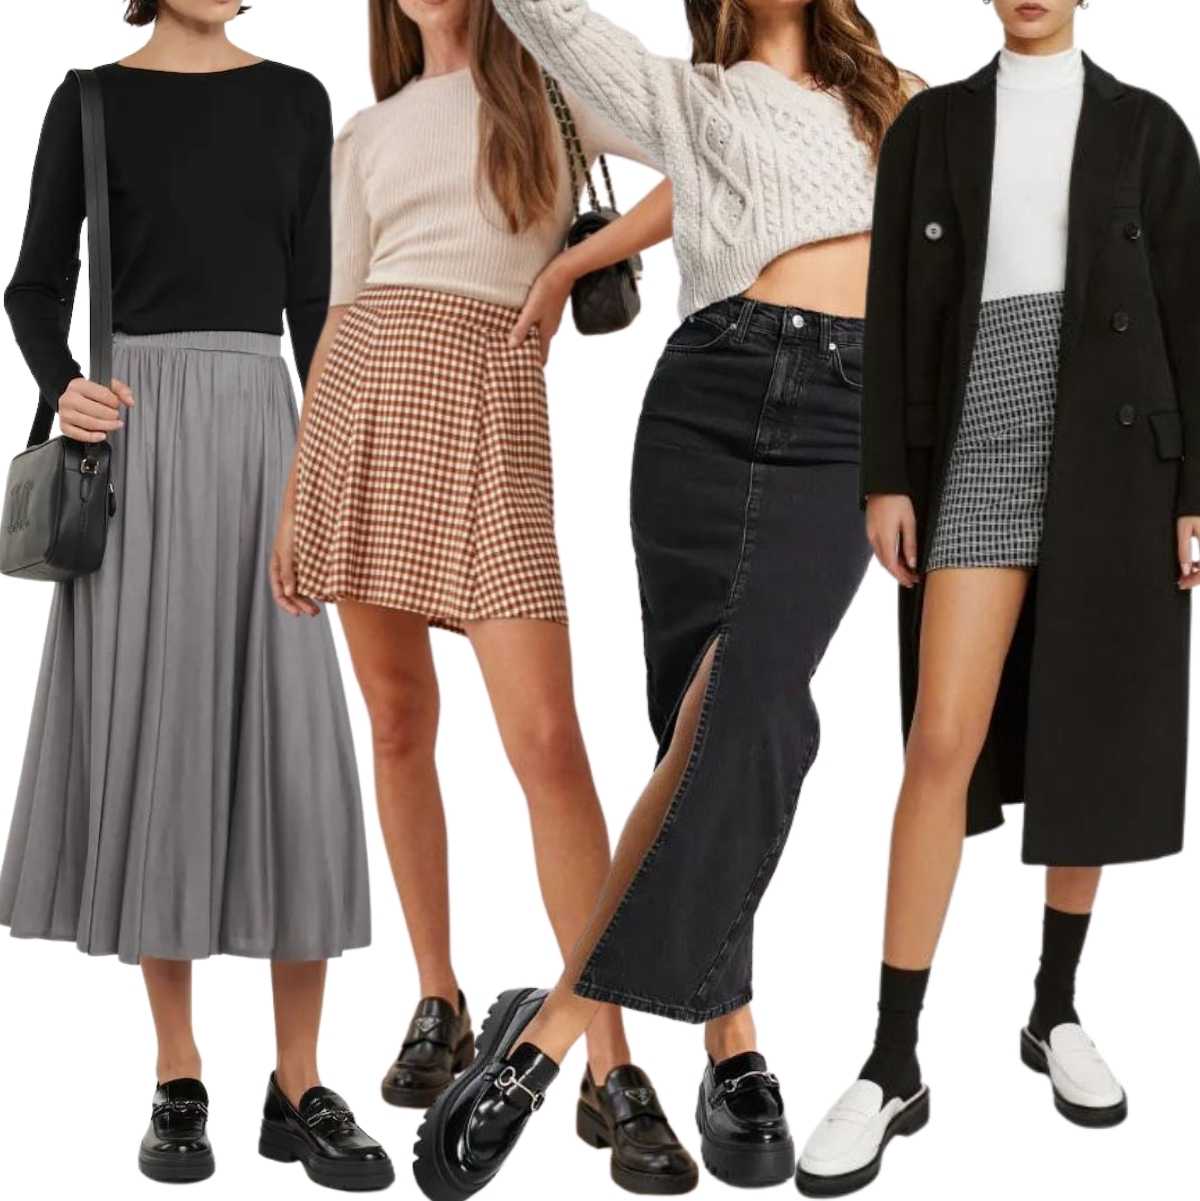 Collage of 4 women wearing loafers with skirts.